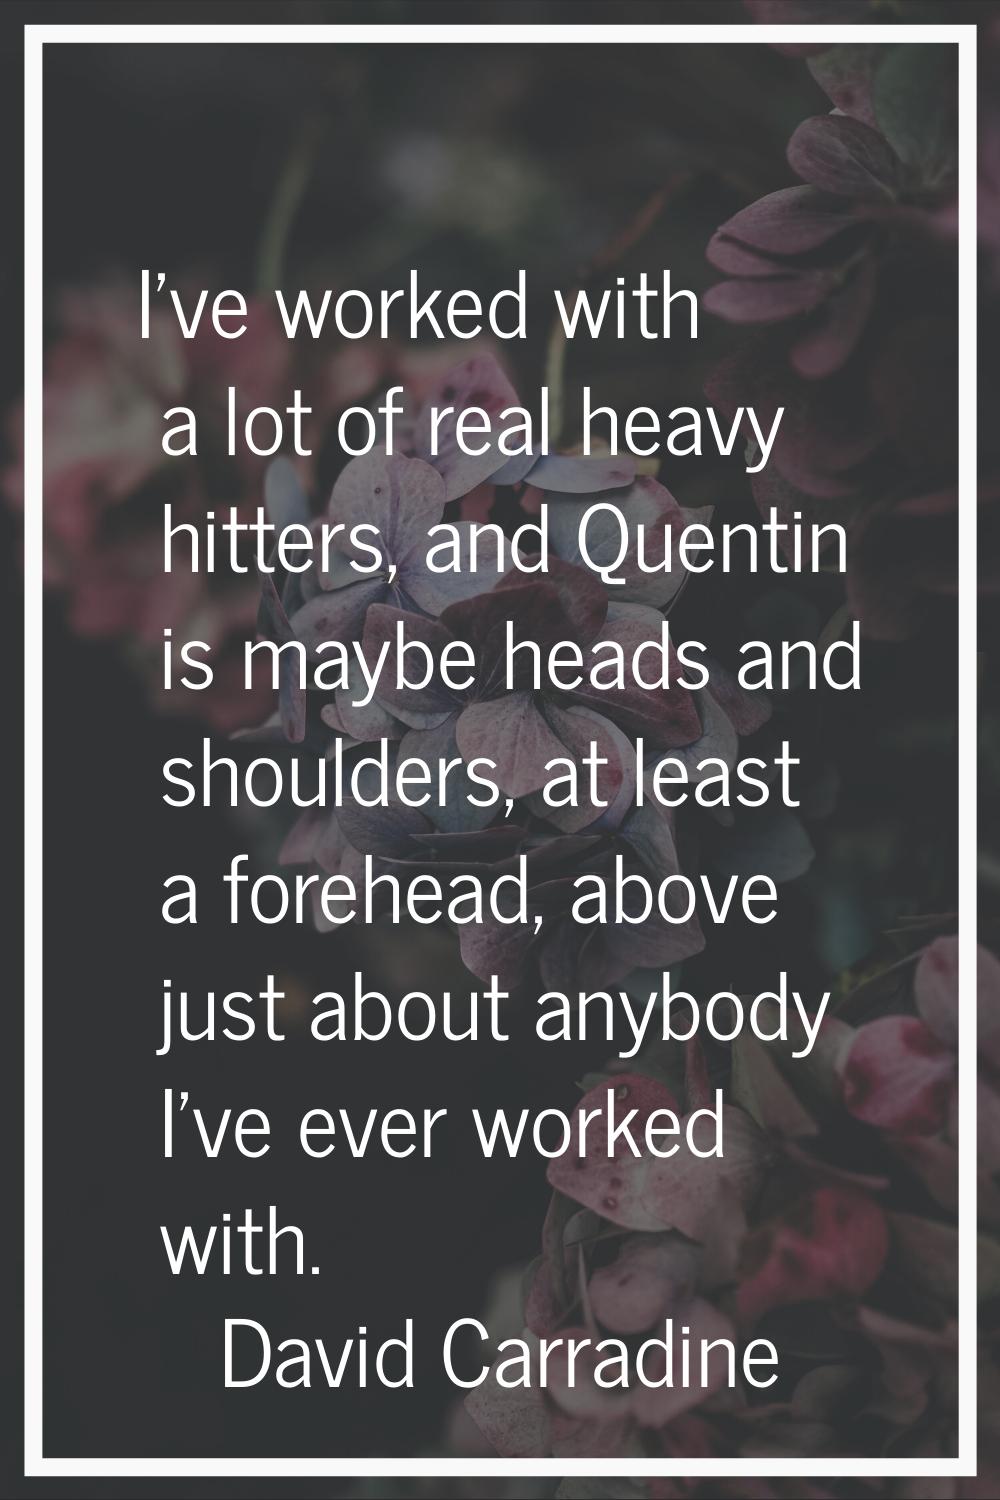 I've worked with a lot of real heavy hitters, and Quentin is maybe heads and shoulders, at least a 